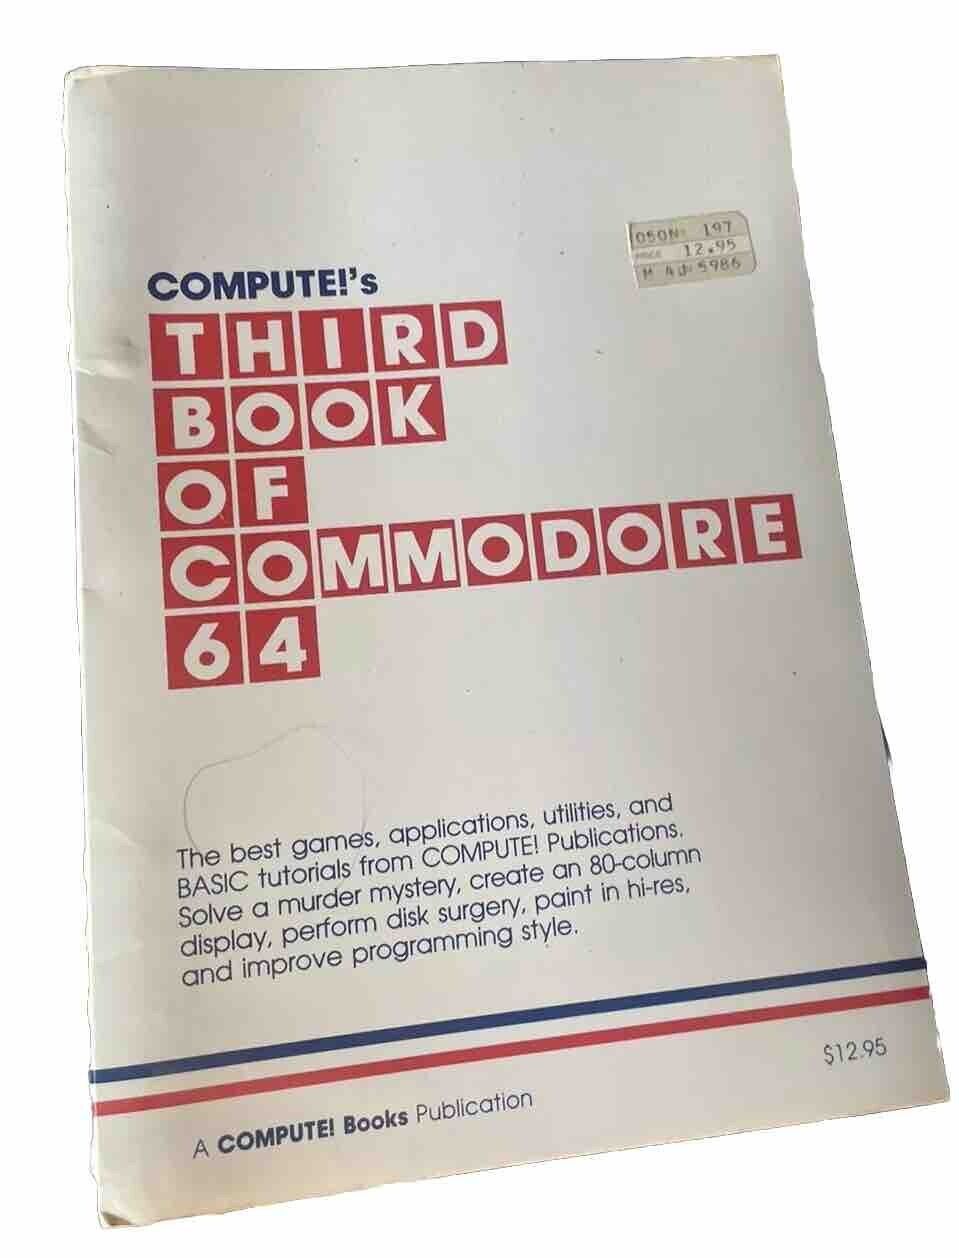 Compute's Third Book of Commodore 64 Compute Books Publication 1984 vintage